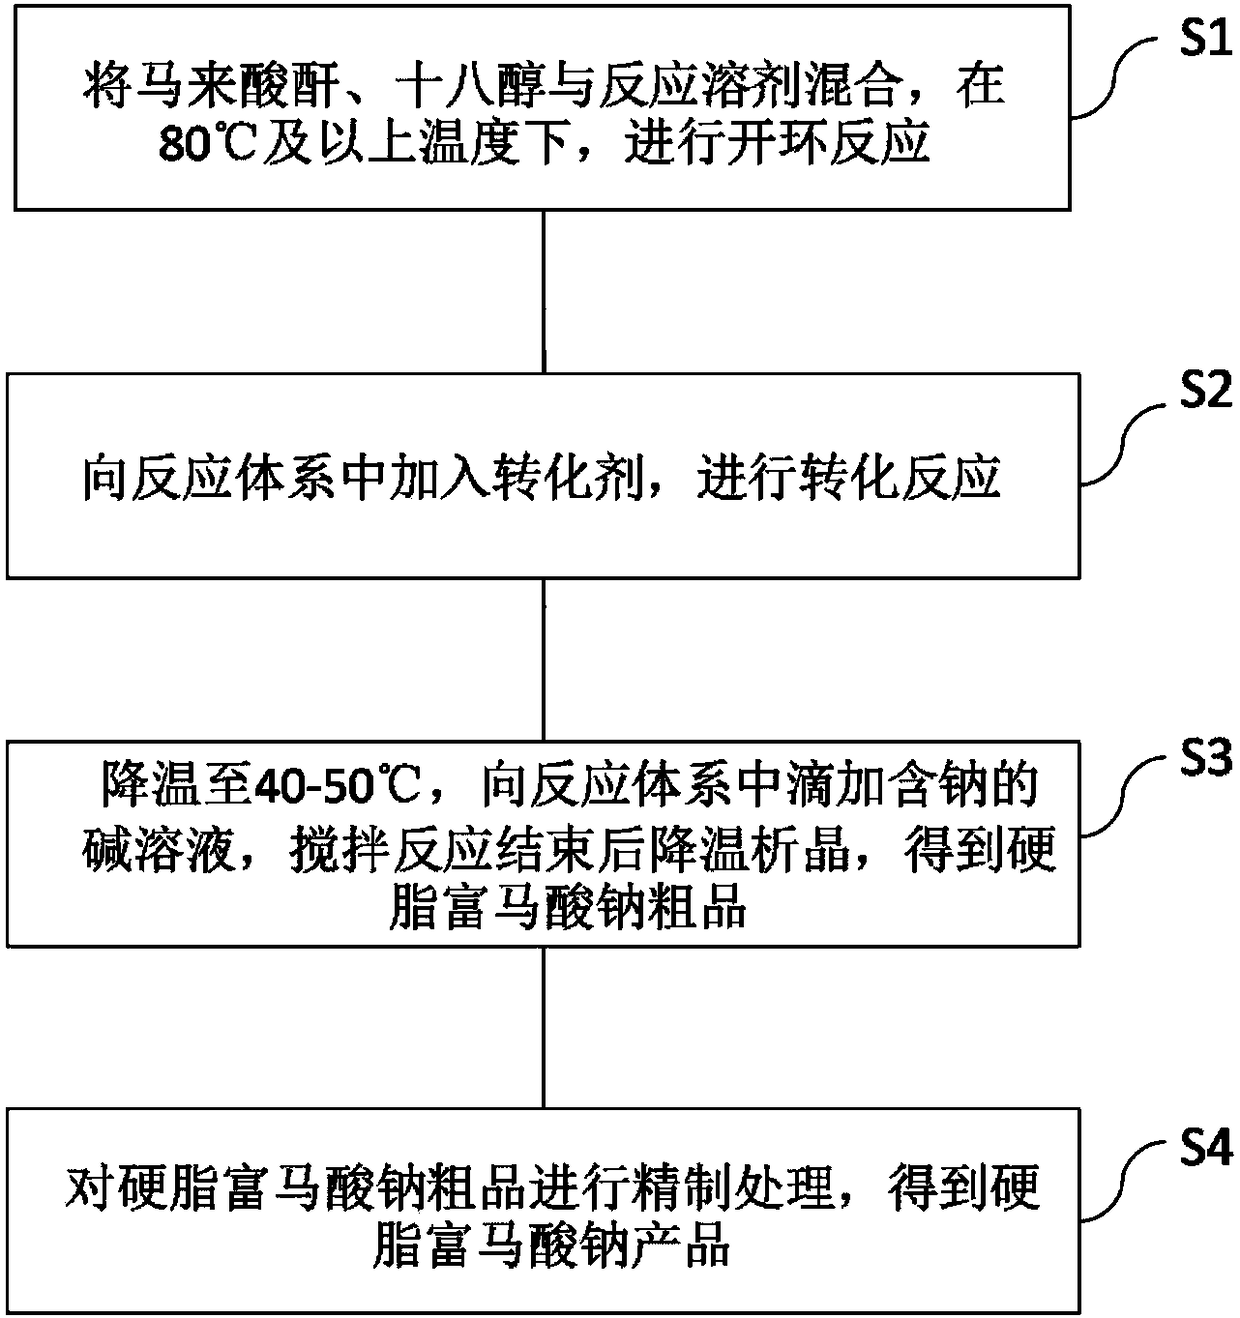 Sodium stearyl fumarate auxiliary material and preparation method thereof